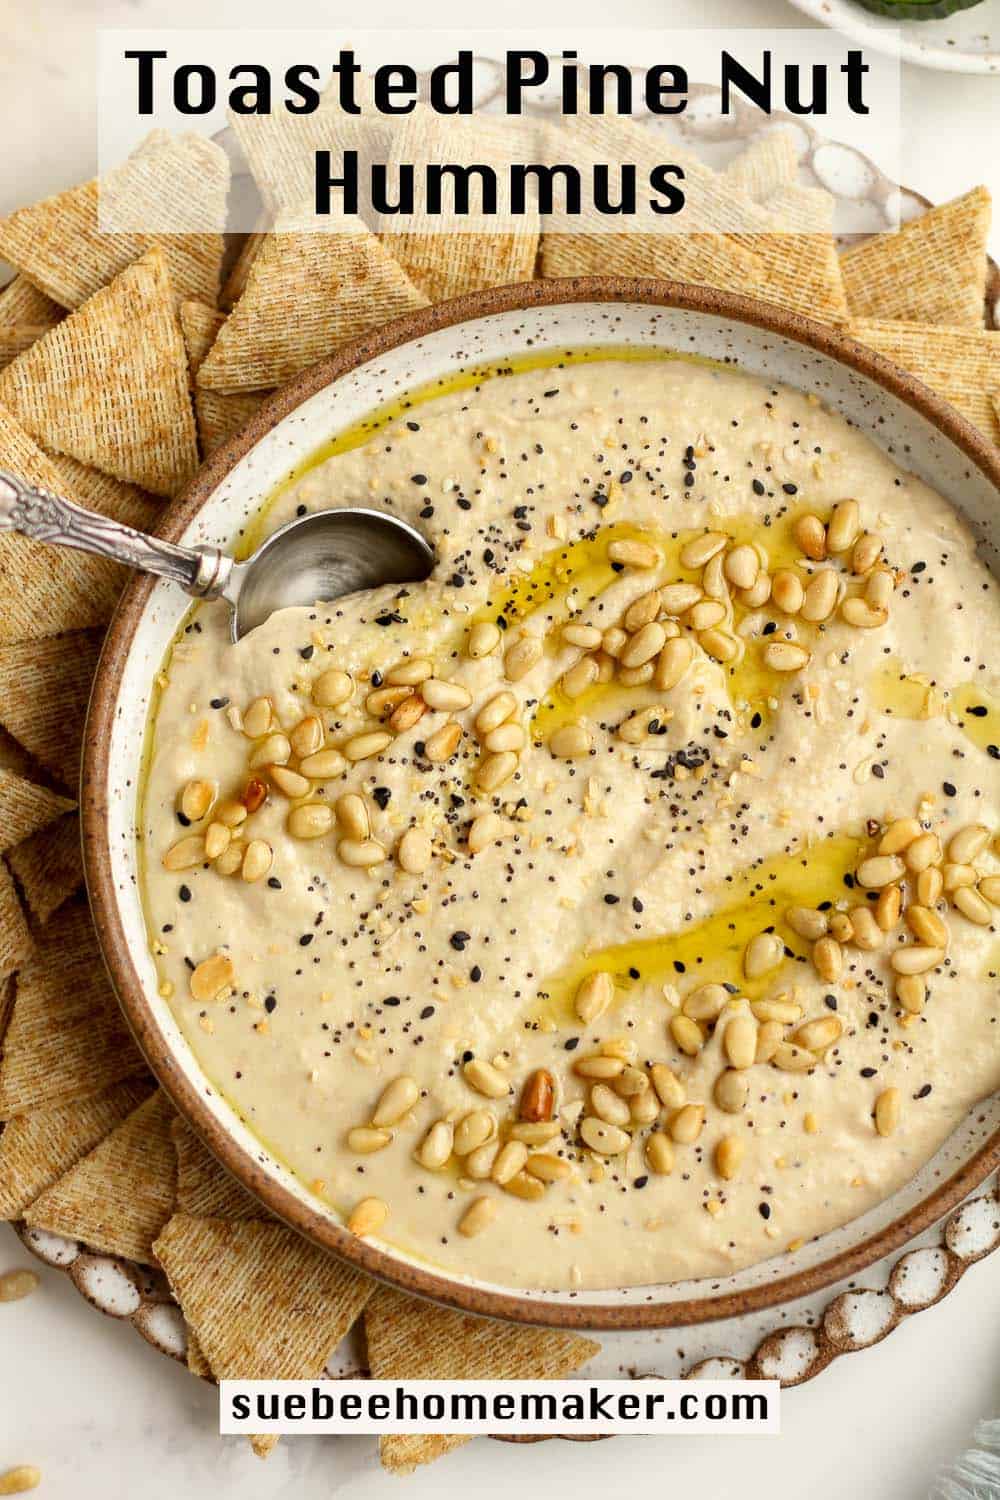 A bowl of toasted pine nut hummus with pine nuts on top, with crackers.